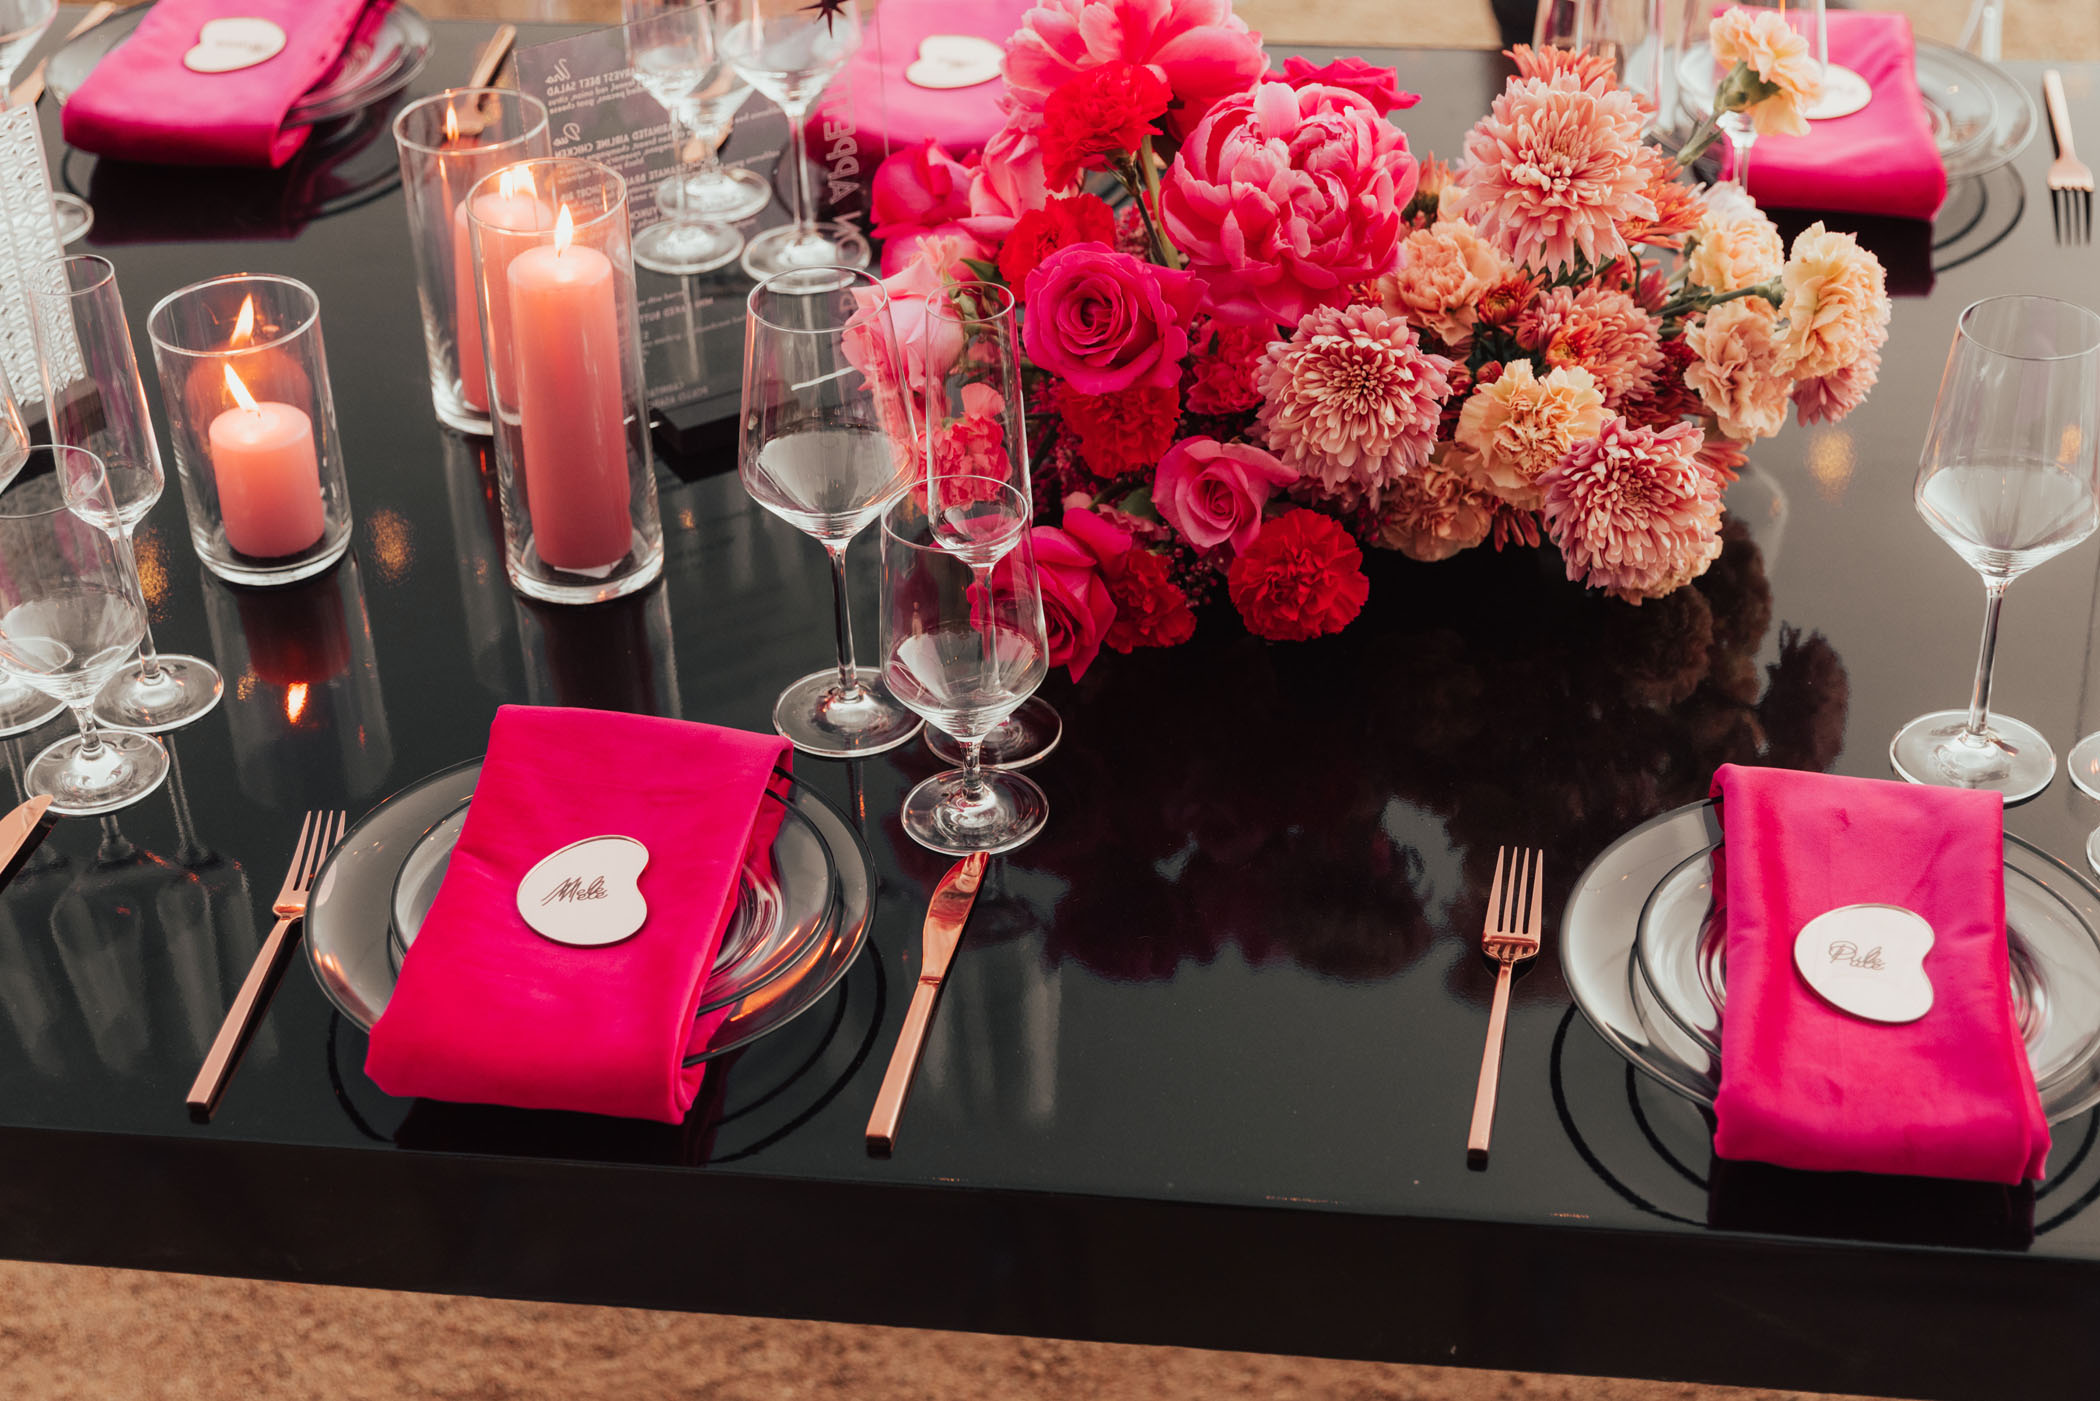 Glam Pink and Red Palm Springs Wedding Reception